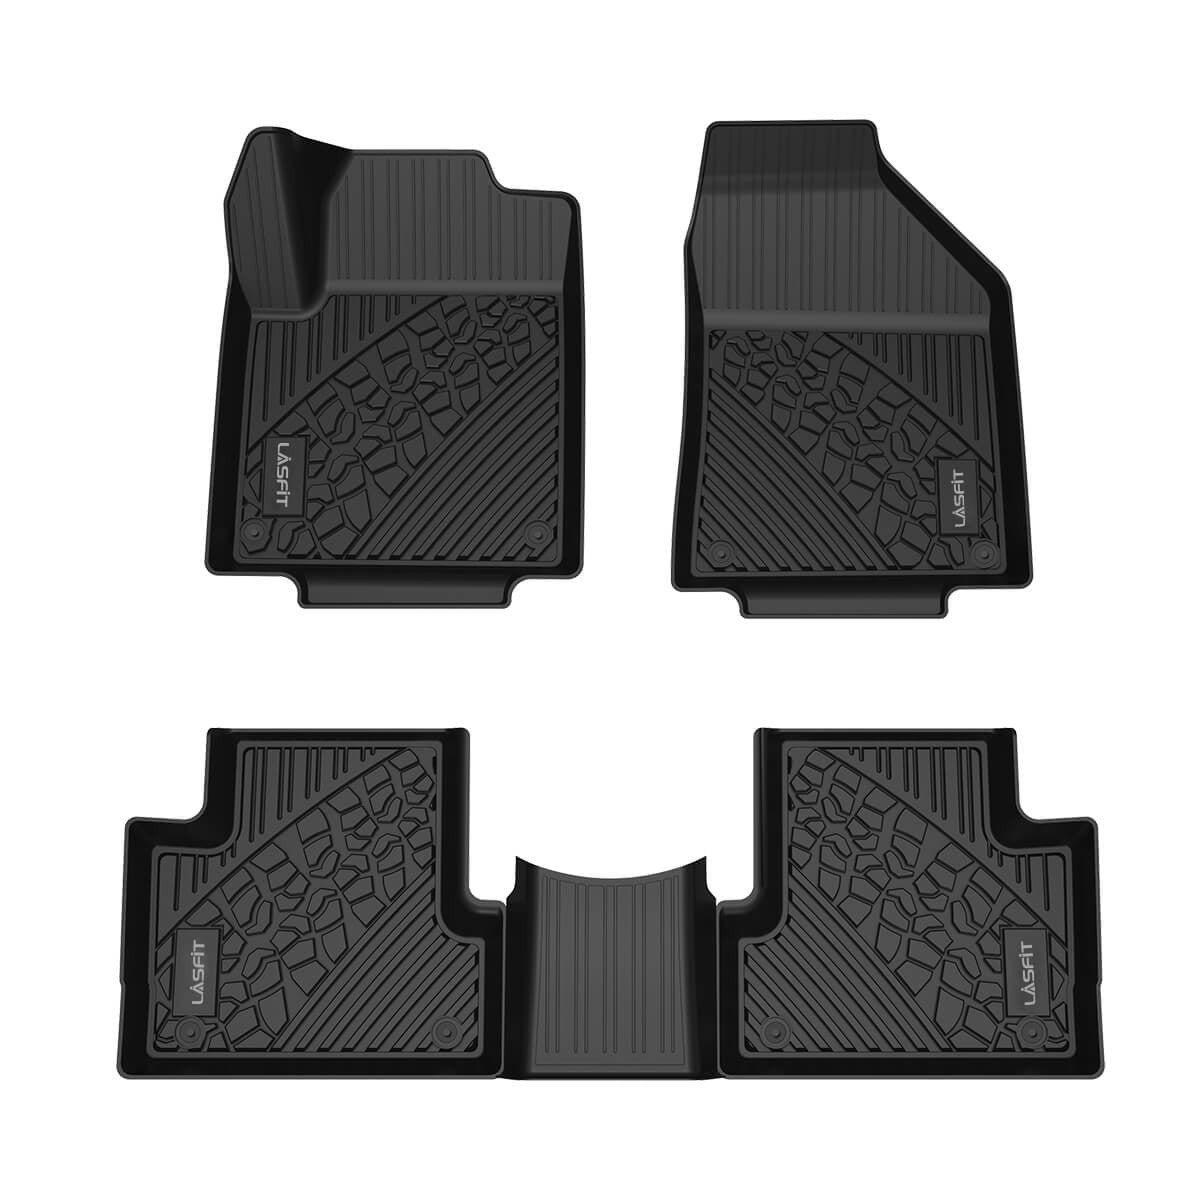 LASFIT Floor Mats for 2013-2015 Jeep Grand Cherokee, All Weather Fit TPE Floor Liners Set, 1st 2015 Jeep Grand Cherokee All Weather Mats